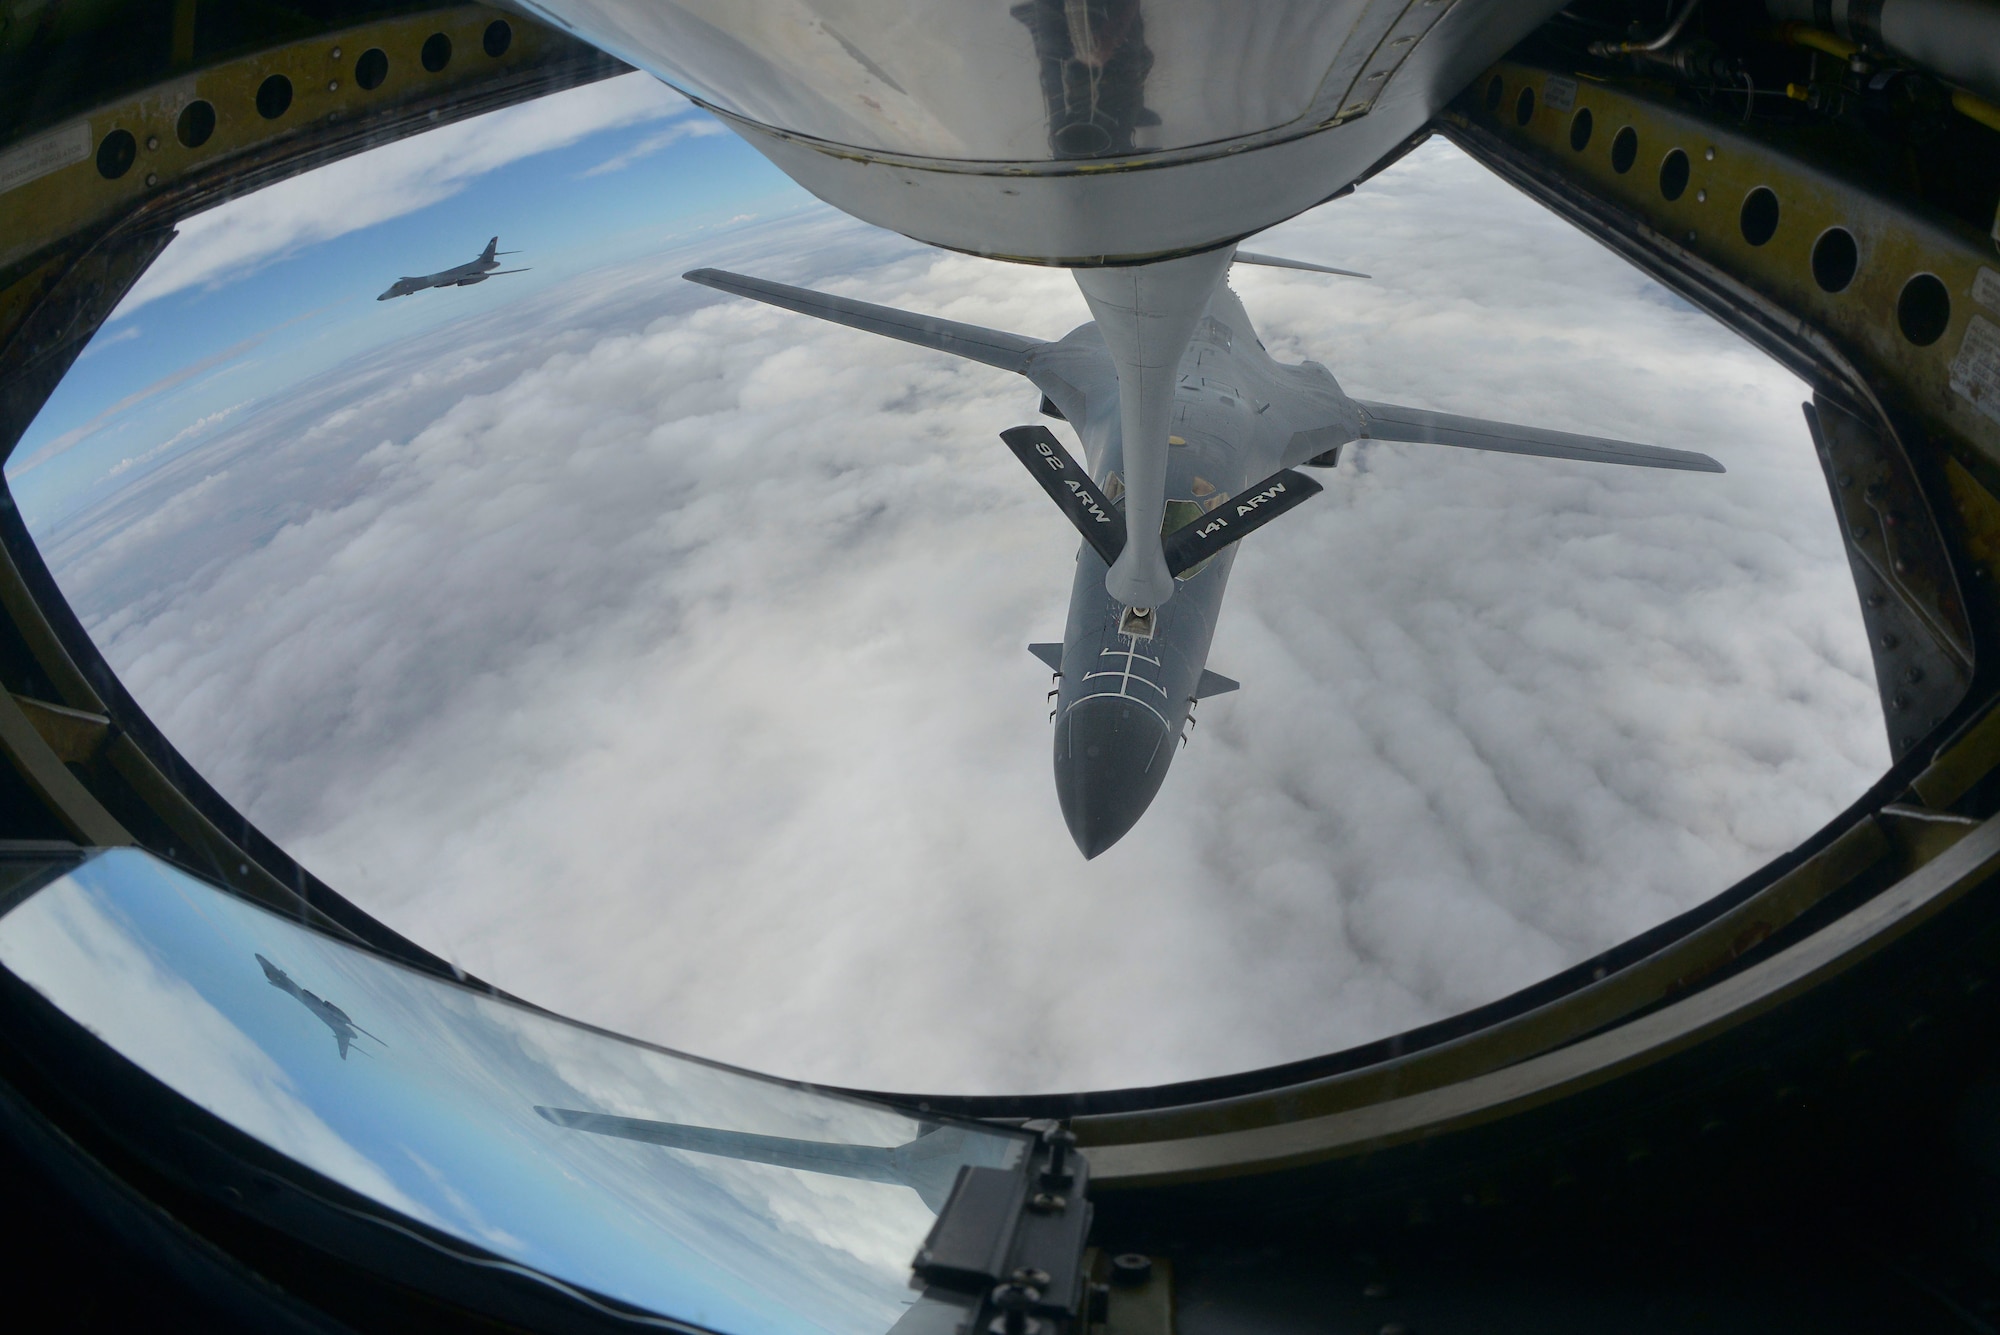 A KC-135 Stratotanker from Fairchild Air Force Base, Washington, refuels a B-1B Lancer during a training mission over South Dakota, Sept. 23, 2014. For more than 50 years, the KC-135 has provided the core aerial refueling capability for the Air Force. The B-1B is assigned to Ellsworth Air Force Base, South Dakota. (U.S. Air Force photo by Airman 1st Class Janelle Patiño/Released)